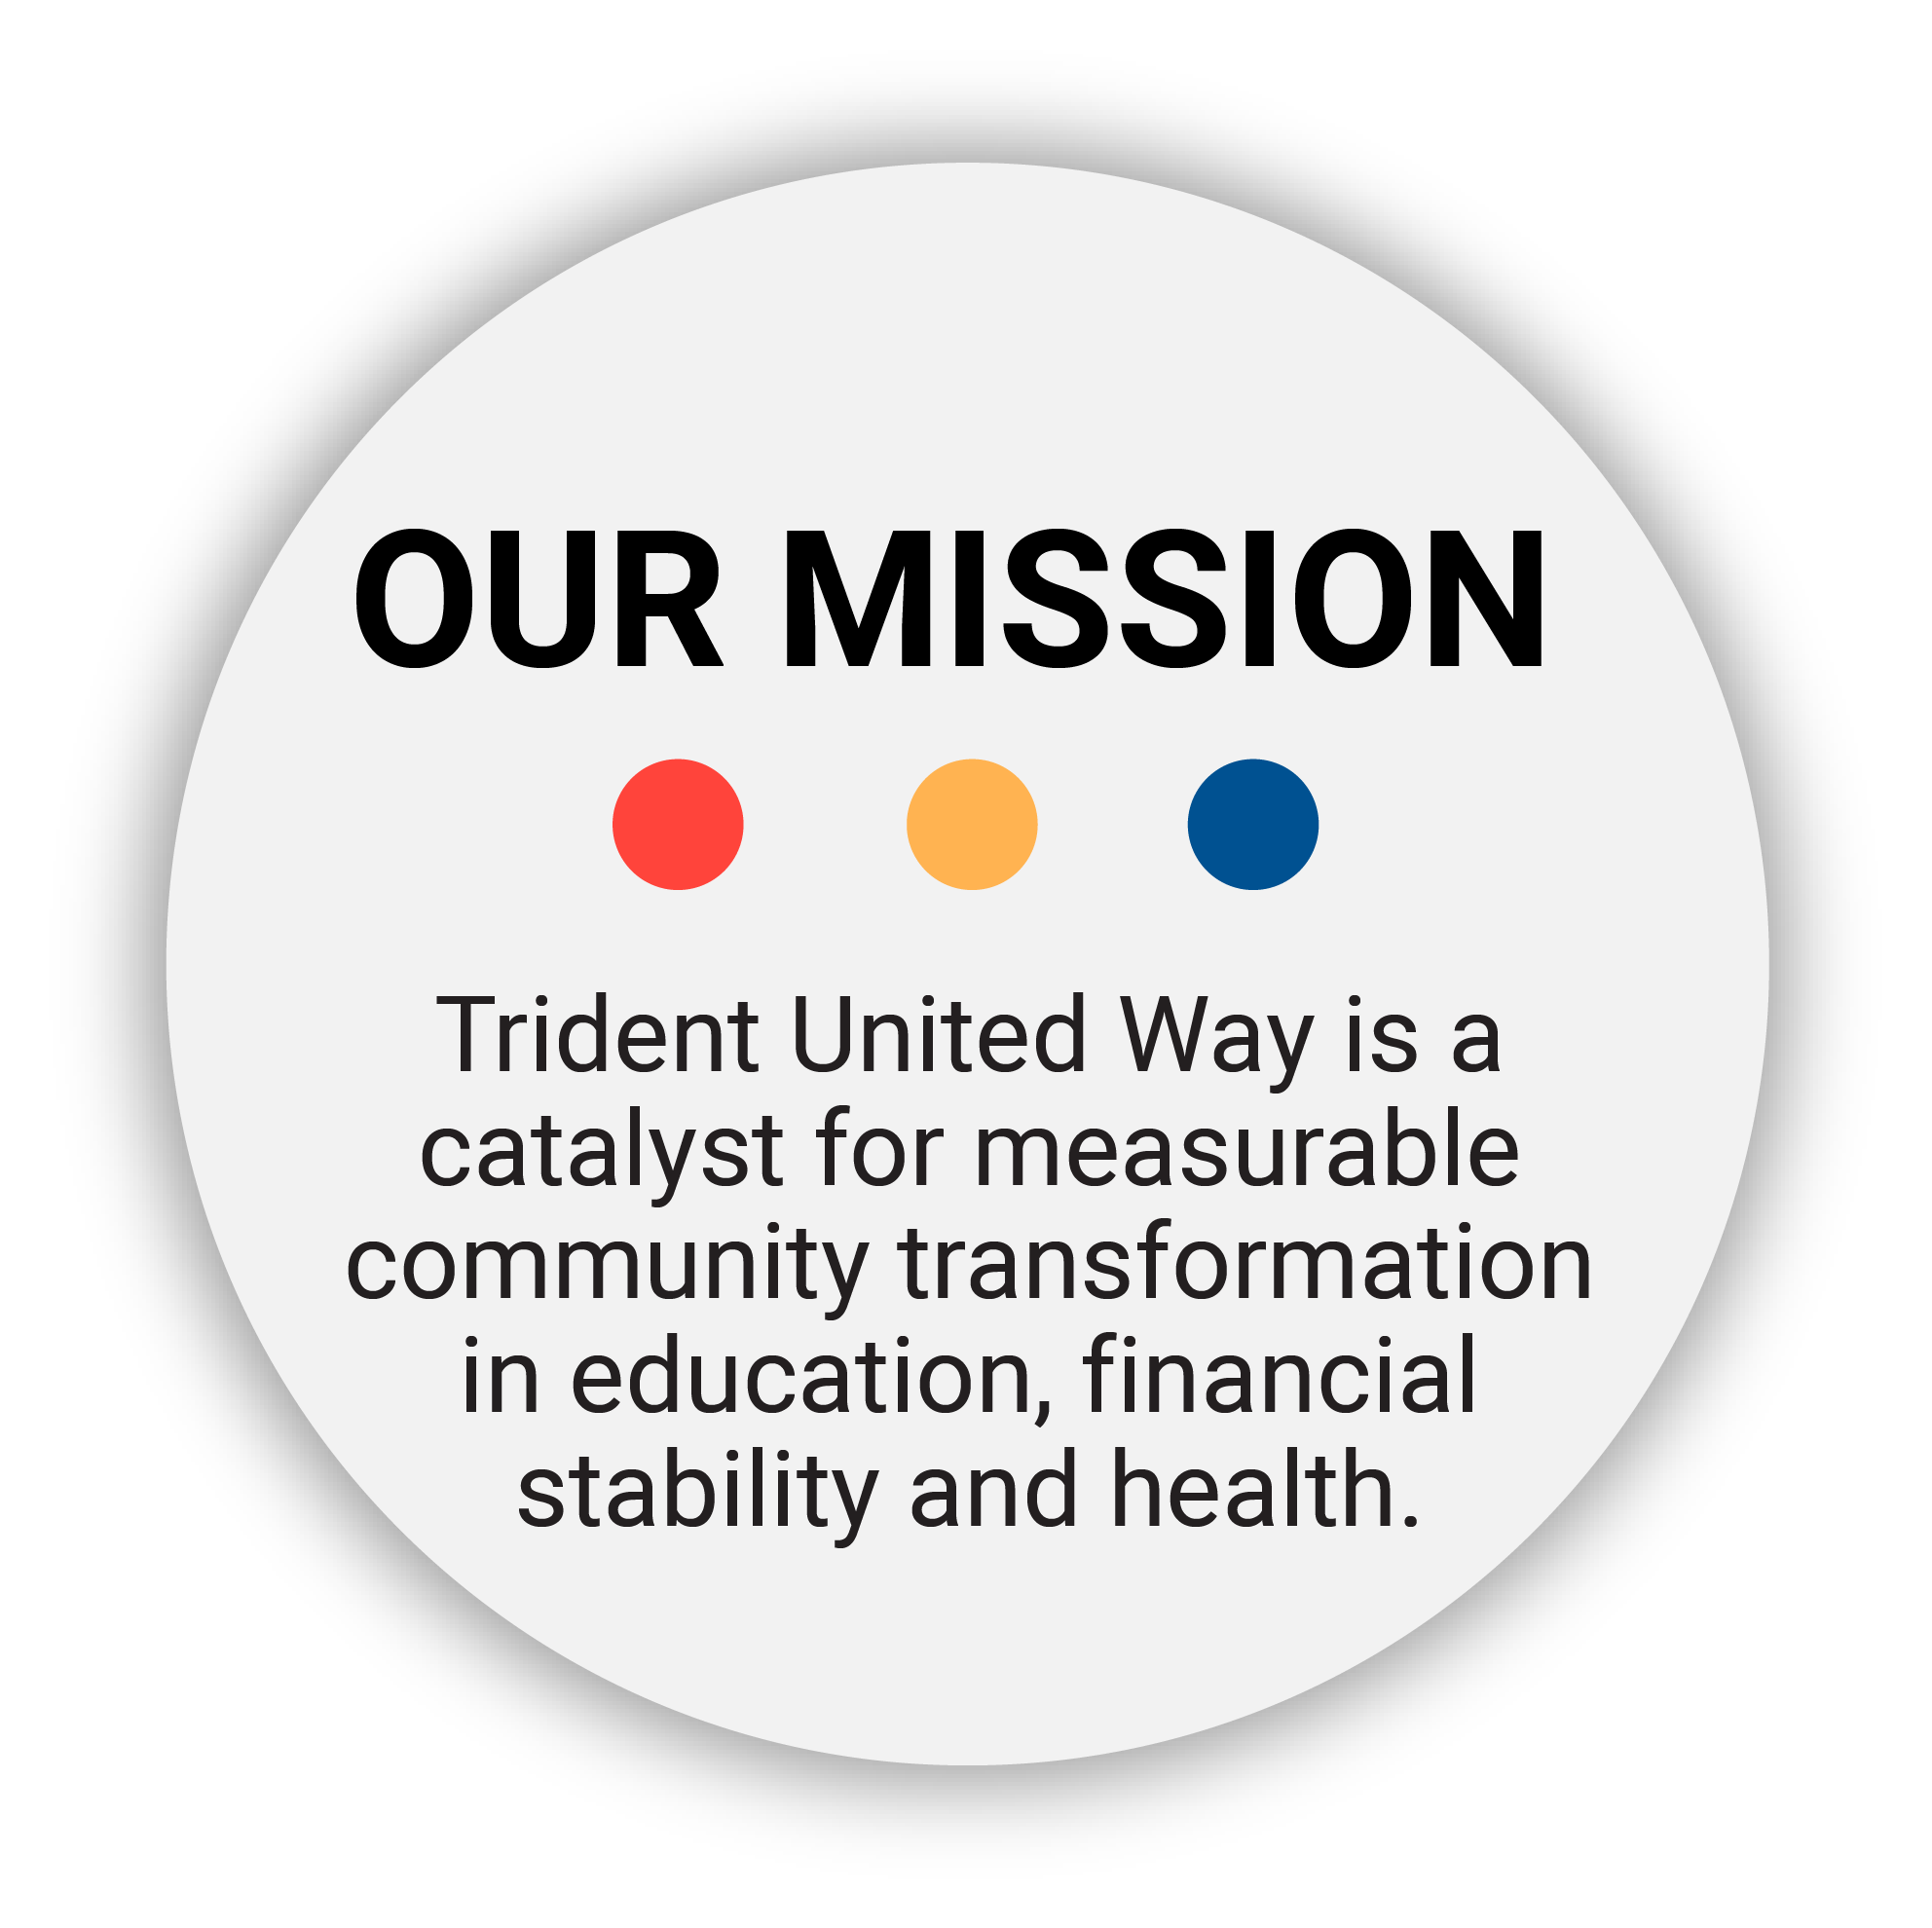 Our mission - Trident United Way is a catalyst for measurable community transformation in education, financial stability and health